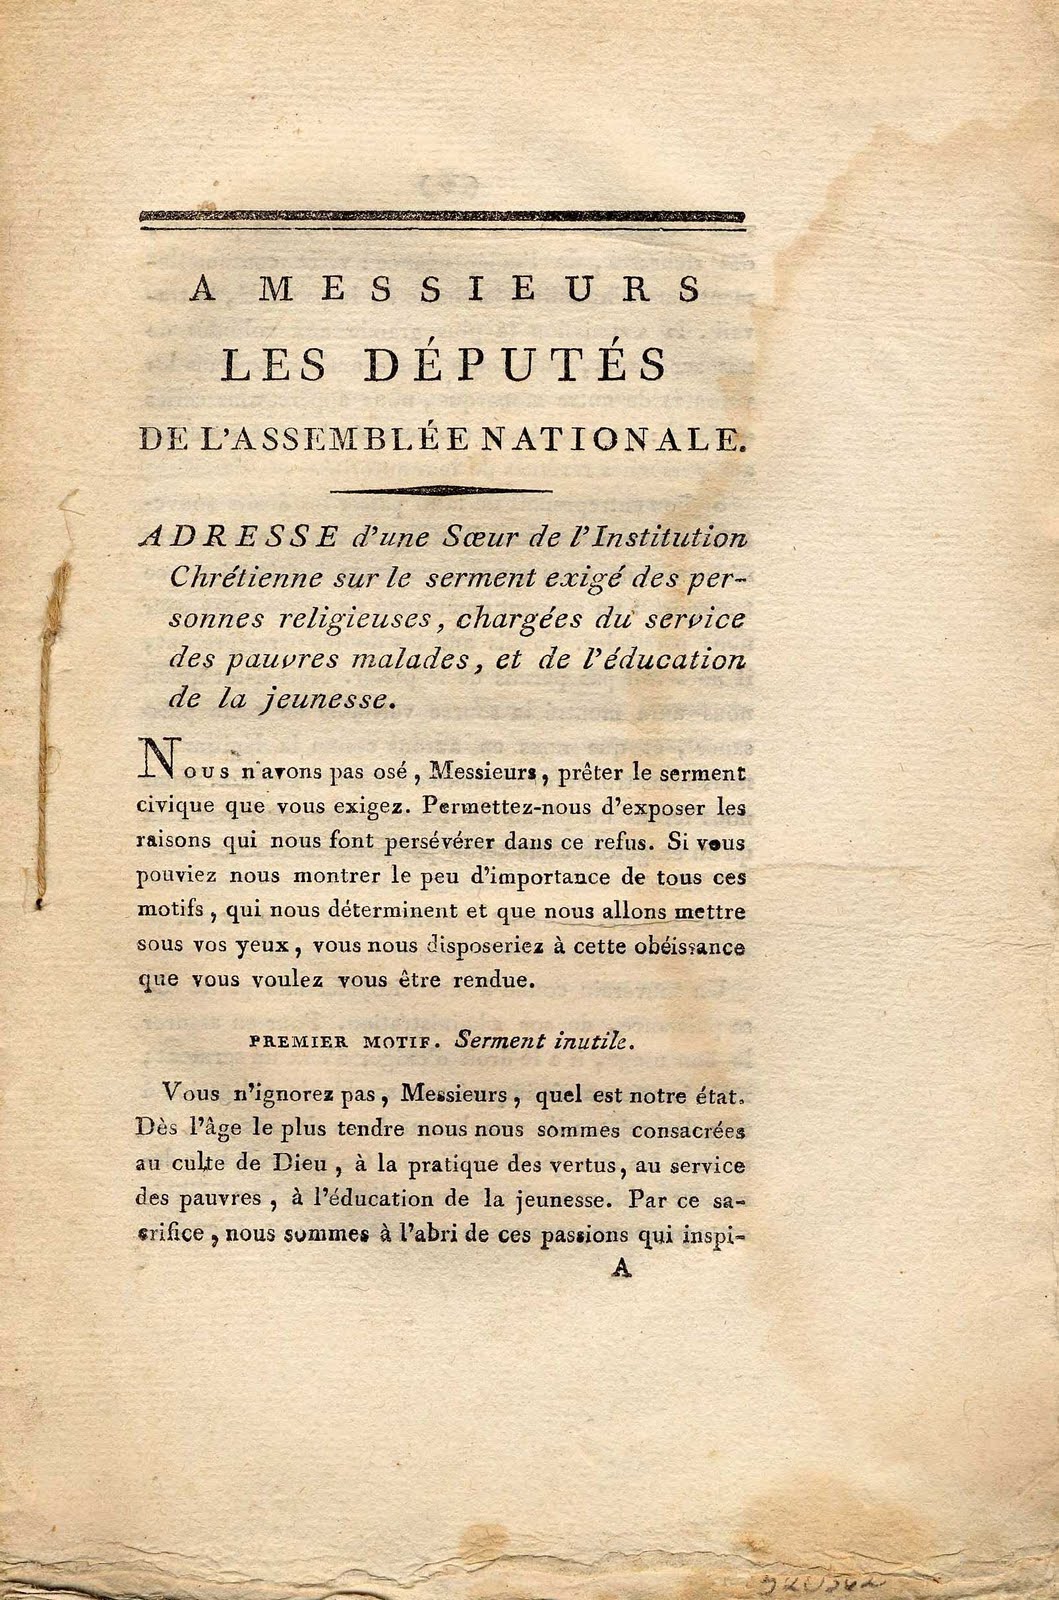  Title page of A Messieurs les députés de l'Assemblée nationale, a pamphlet that deals primarily with the oath required of clergy by the Civil Constitution during the early part of the revolution.